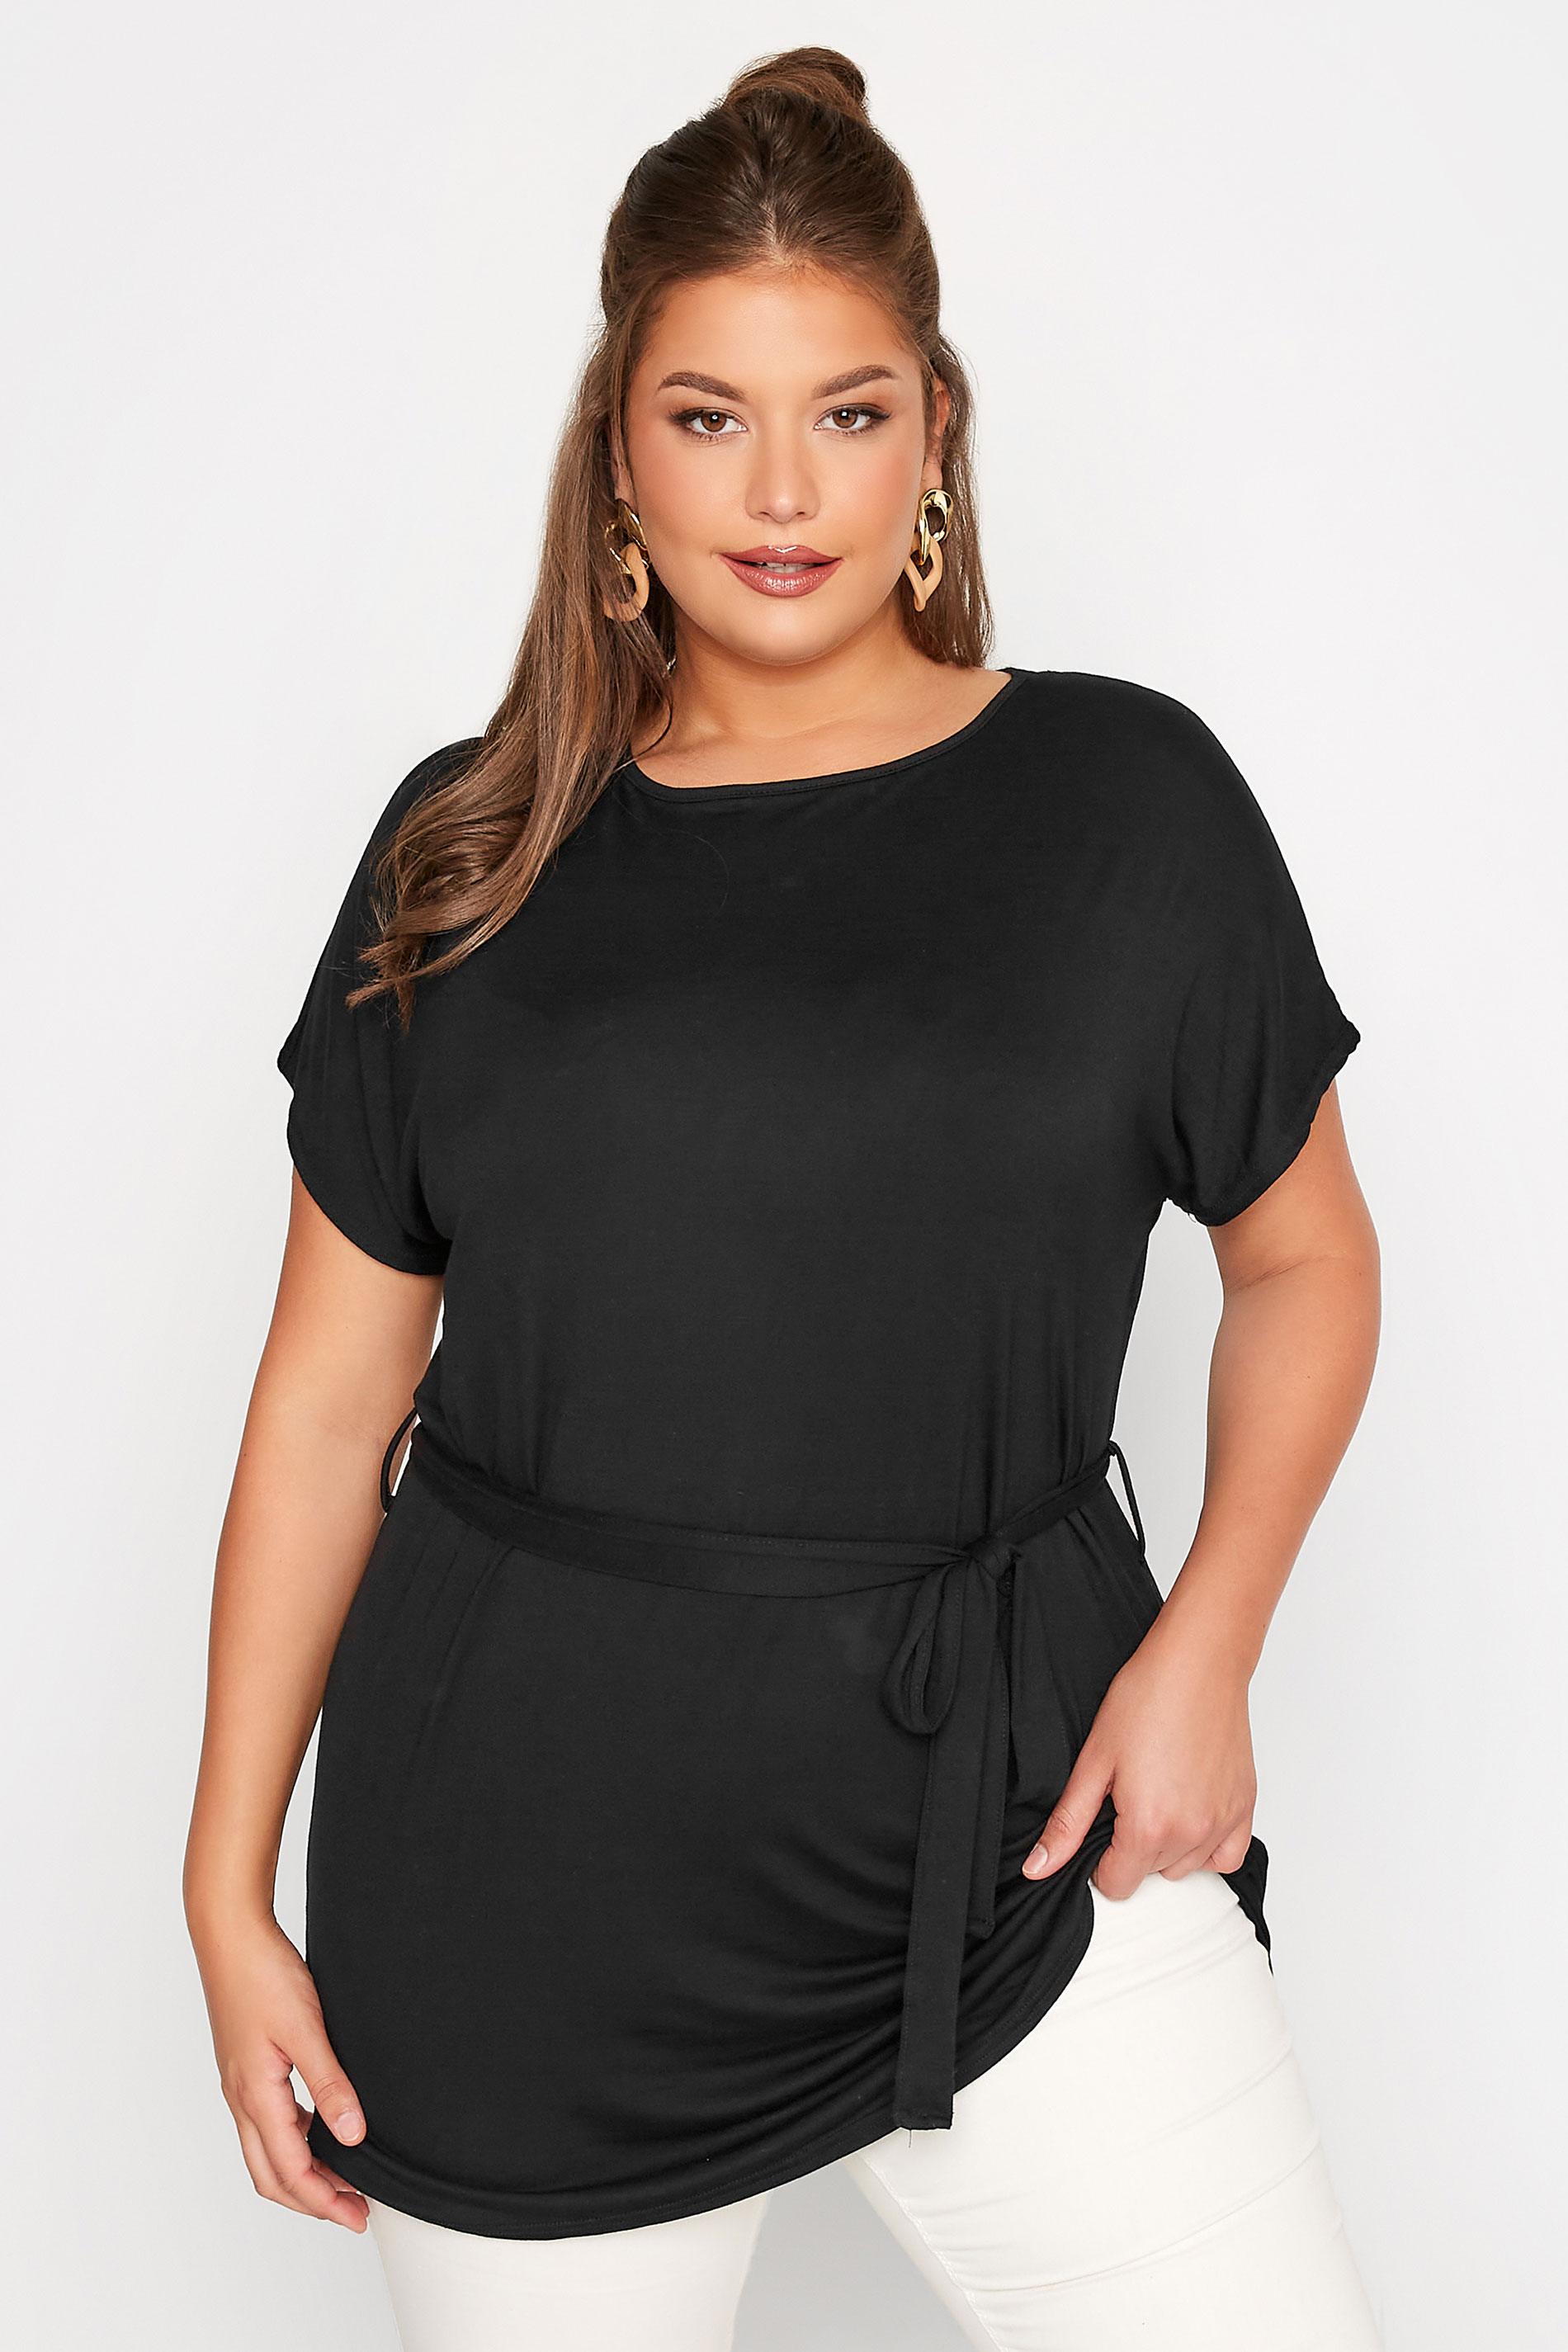 Grande taille  Tops Grande taille  Tops Casual | LIMITED COLLECTION Curve Black Waist Tie Top - XU07231